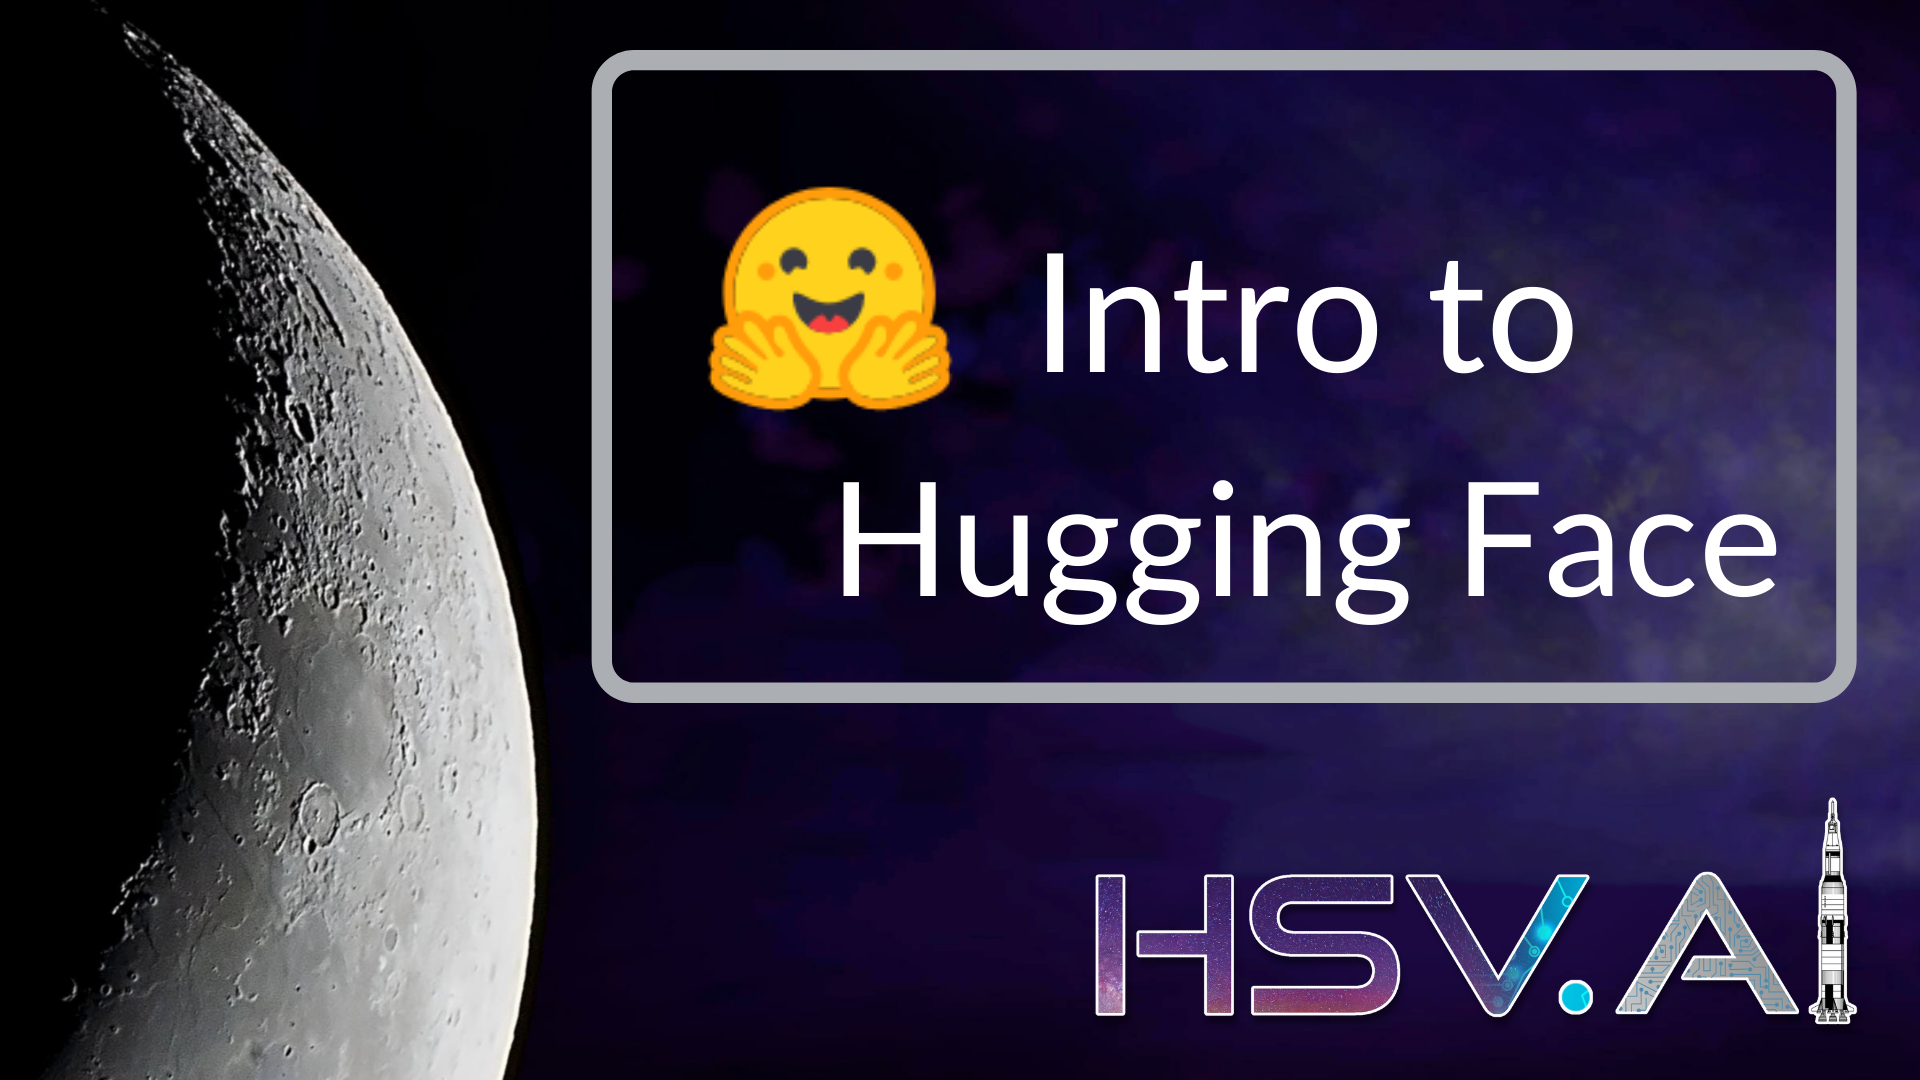 Intro to Hugging Face